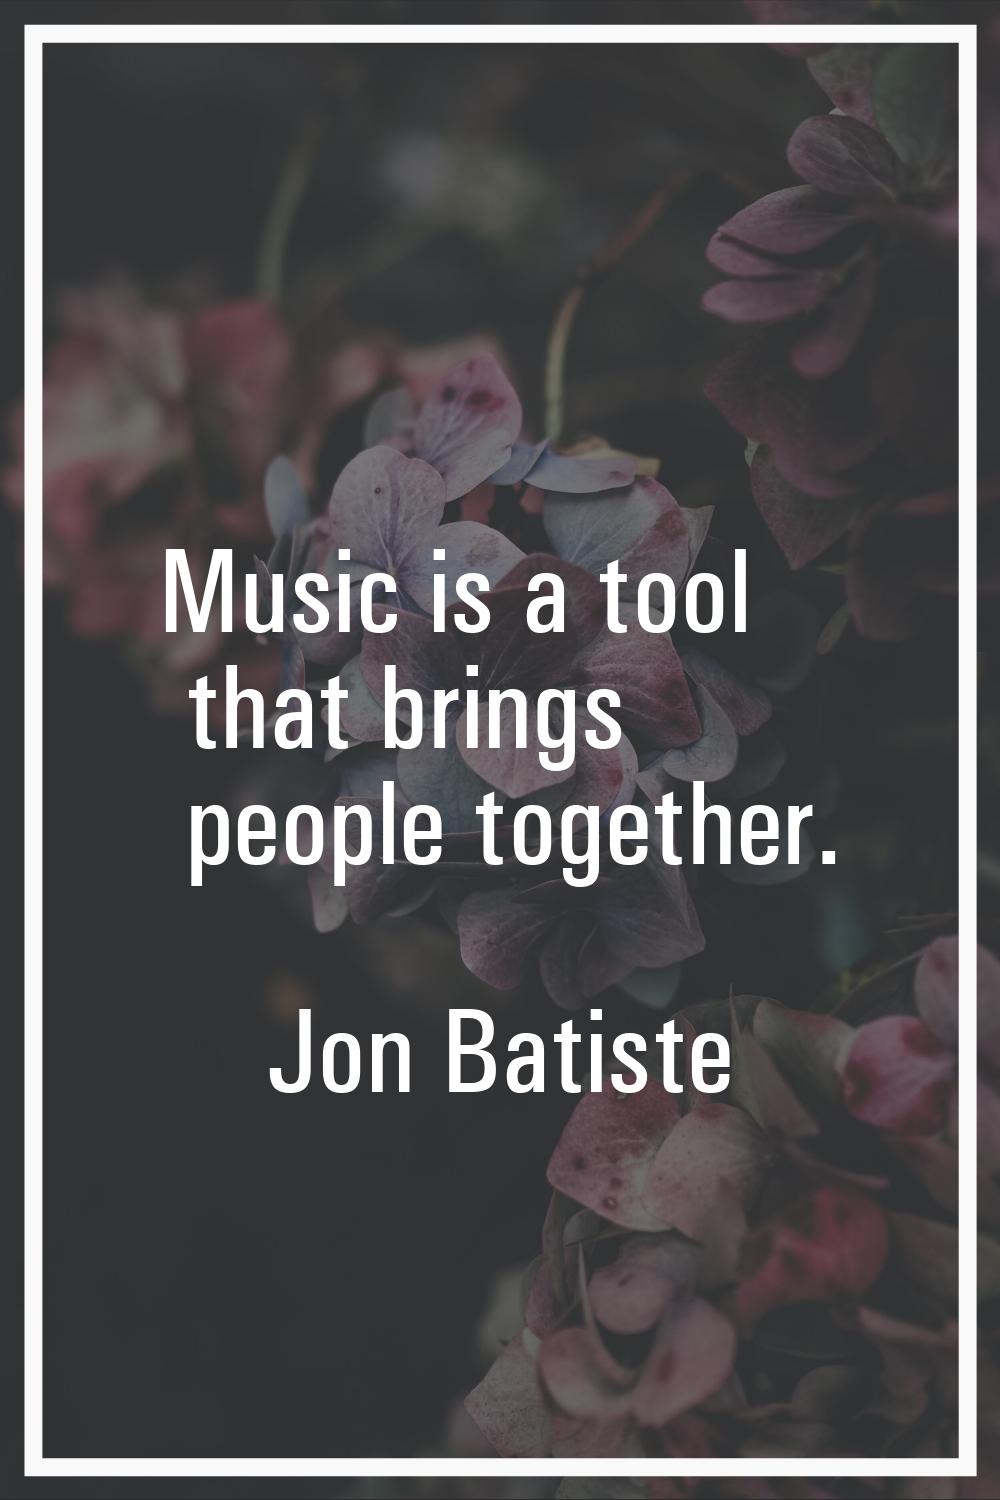 Music is a tool that brings people together.